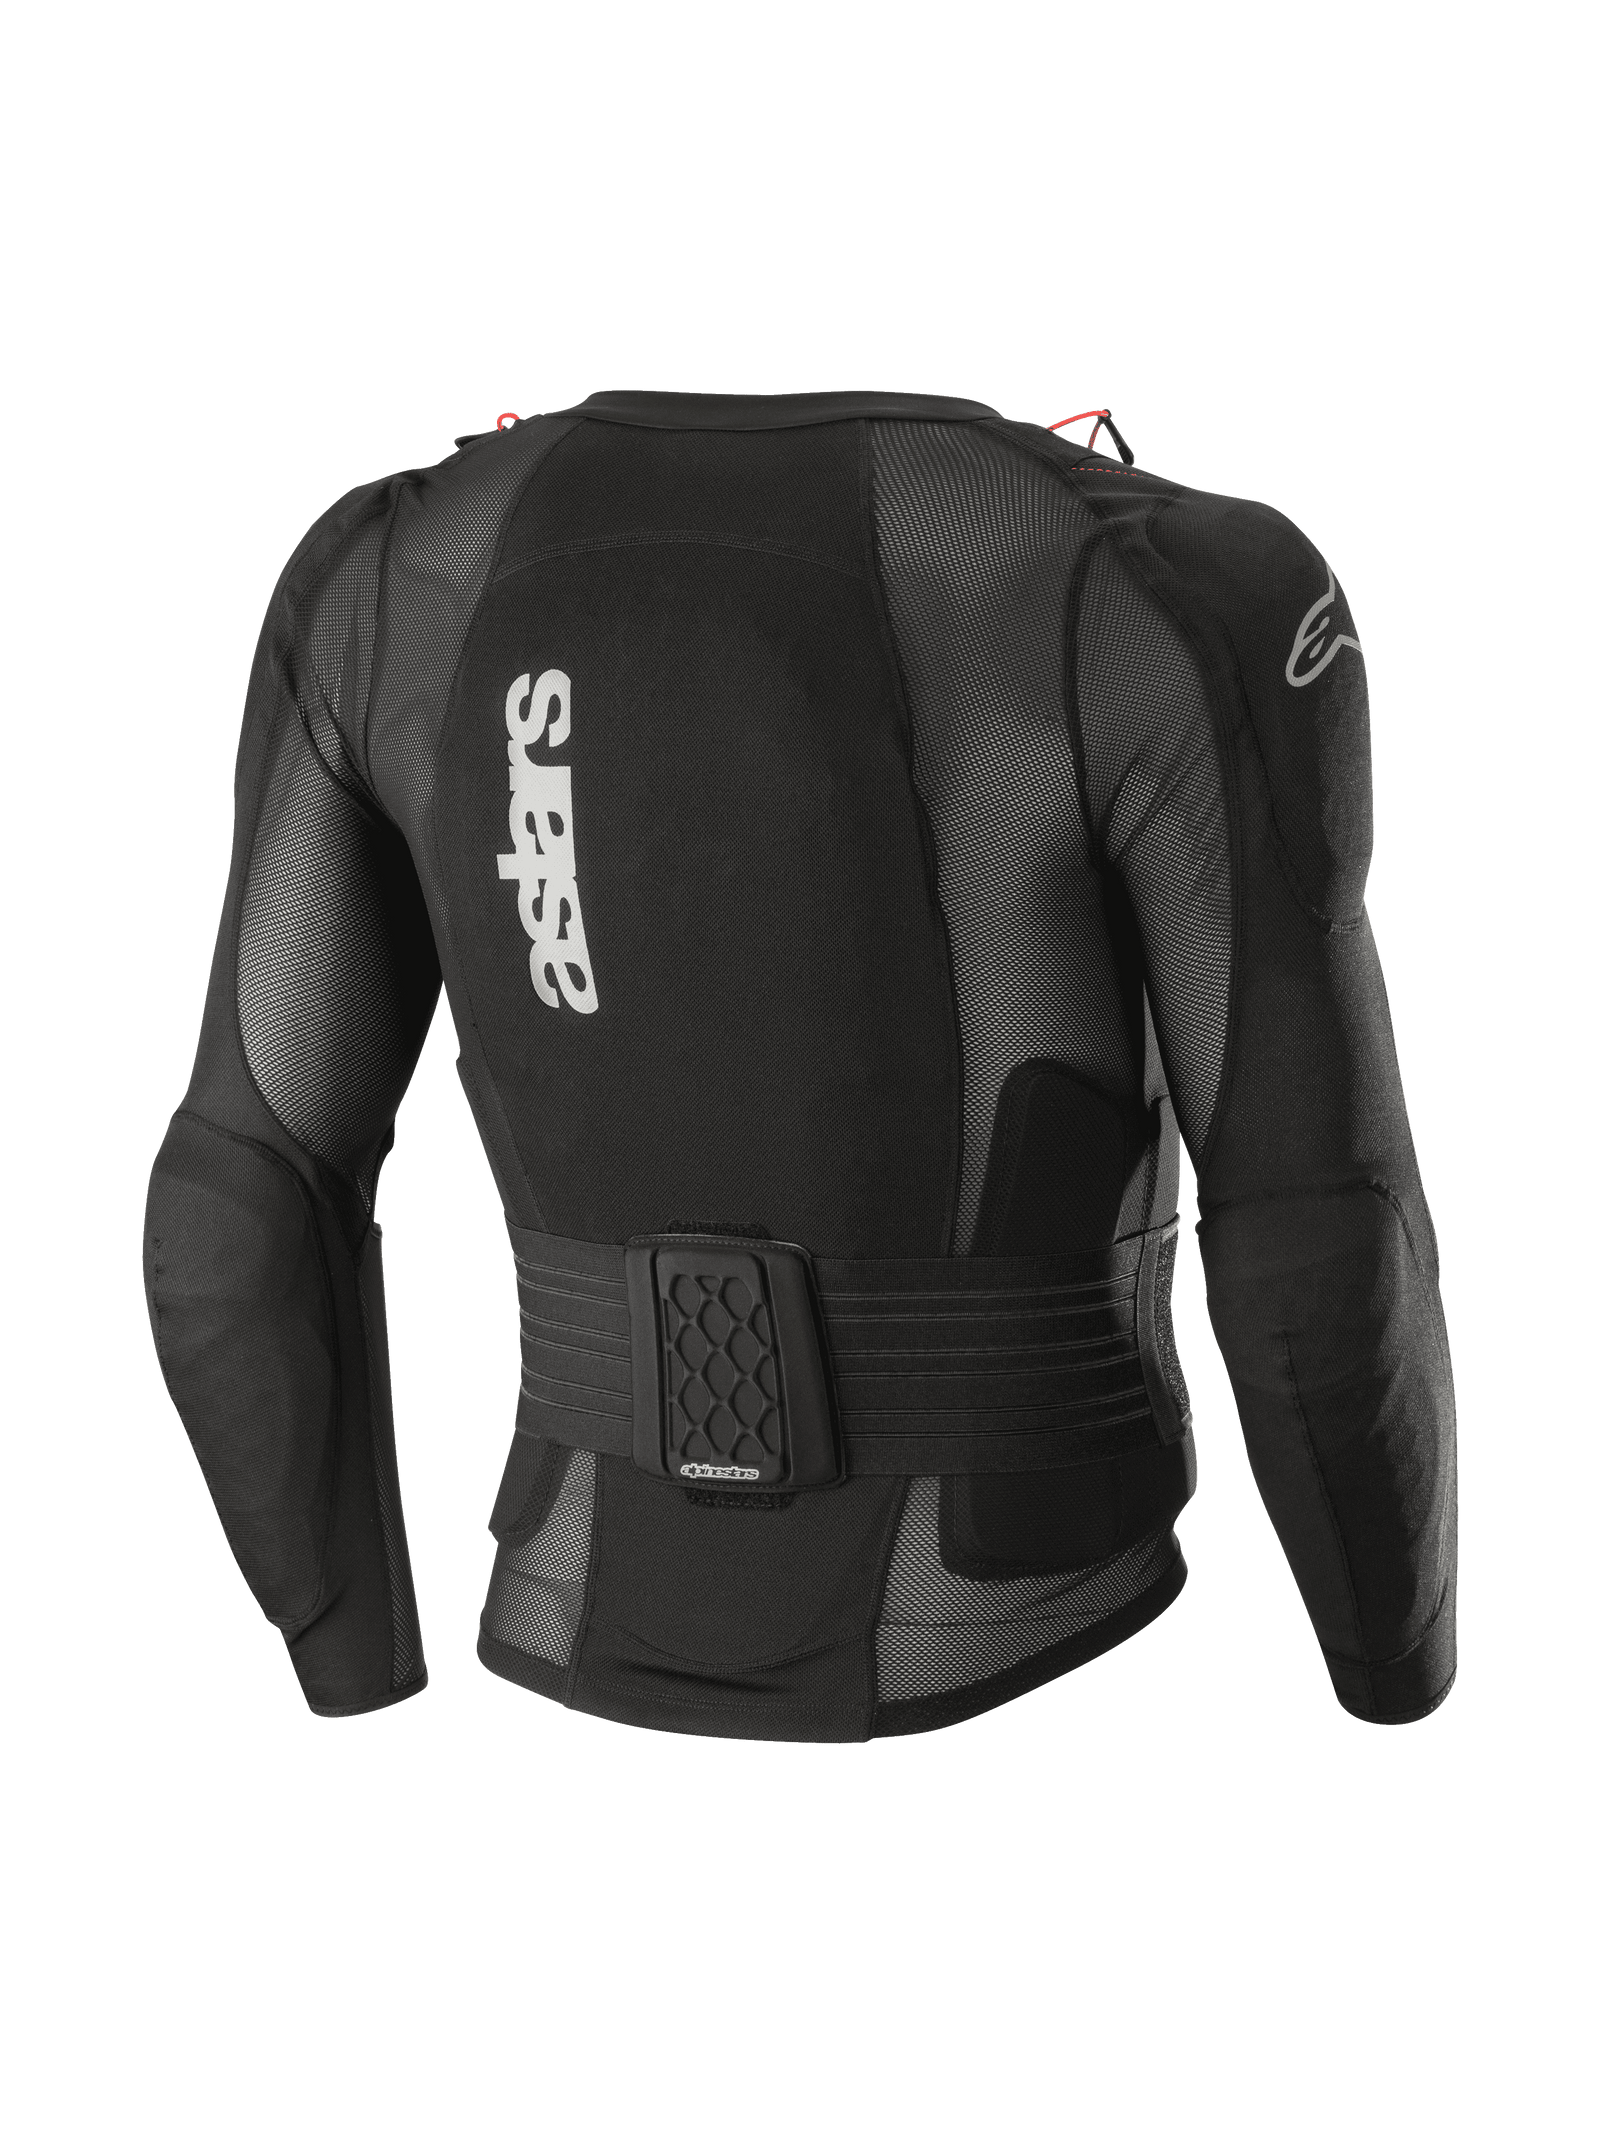 Sequence Protections Veste - Long Sleeve